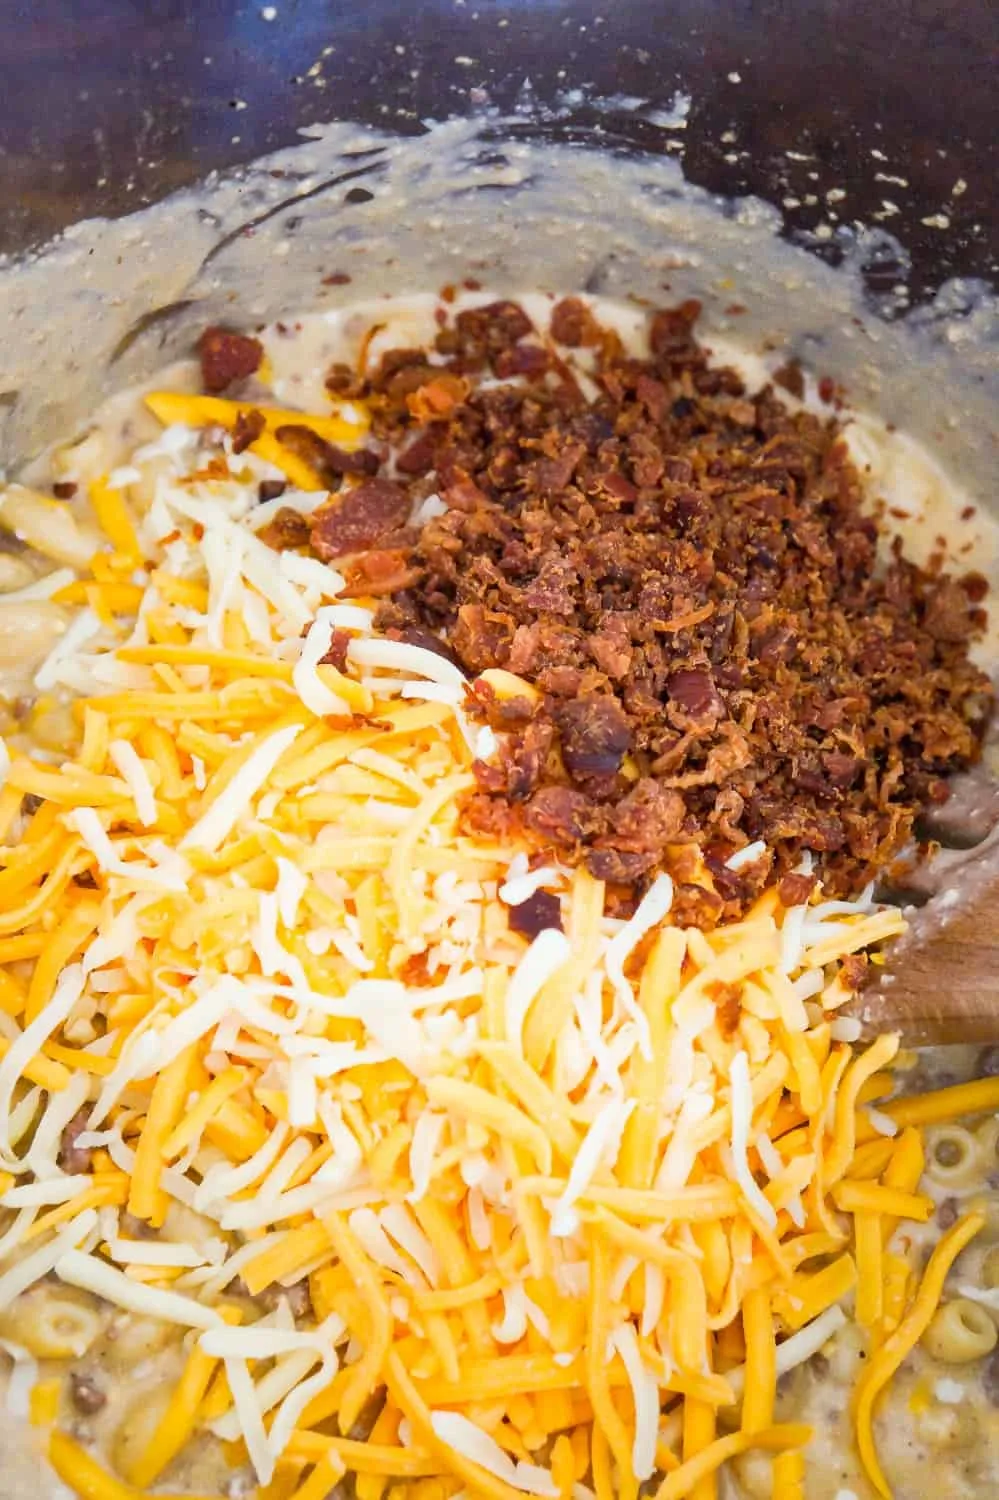 shredded cheddar cheese and real bacon bits on top of pasta in an Instant Pot